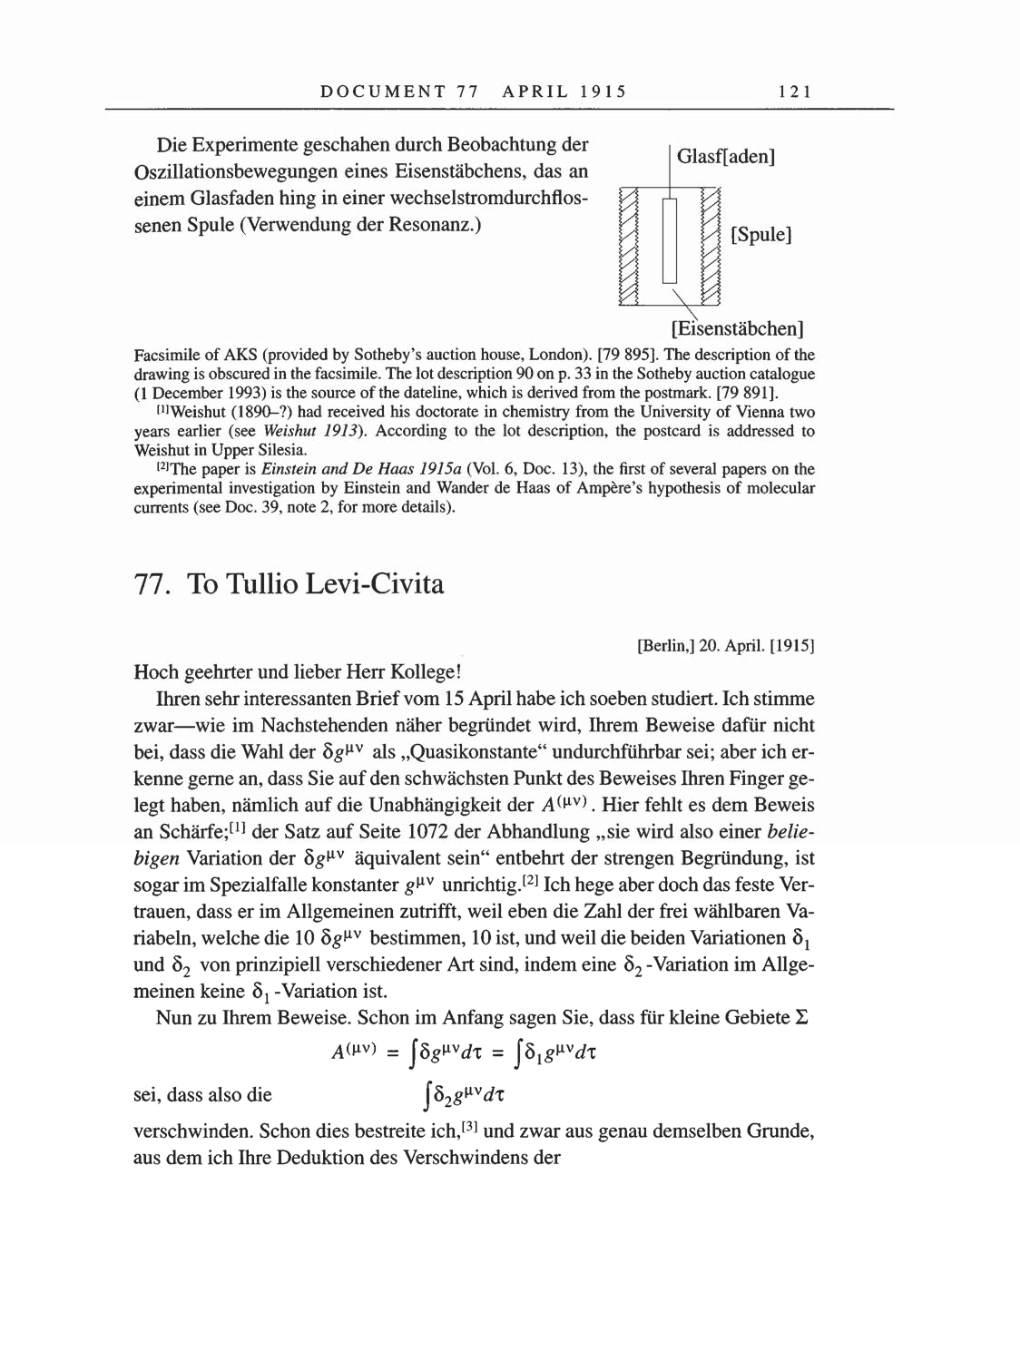 Volume 8, Part A: The Berlin Years: Correspondence 1914-1917 page 121